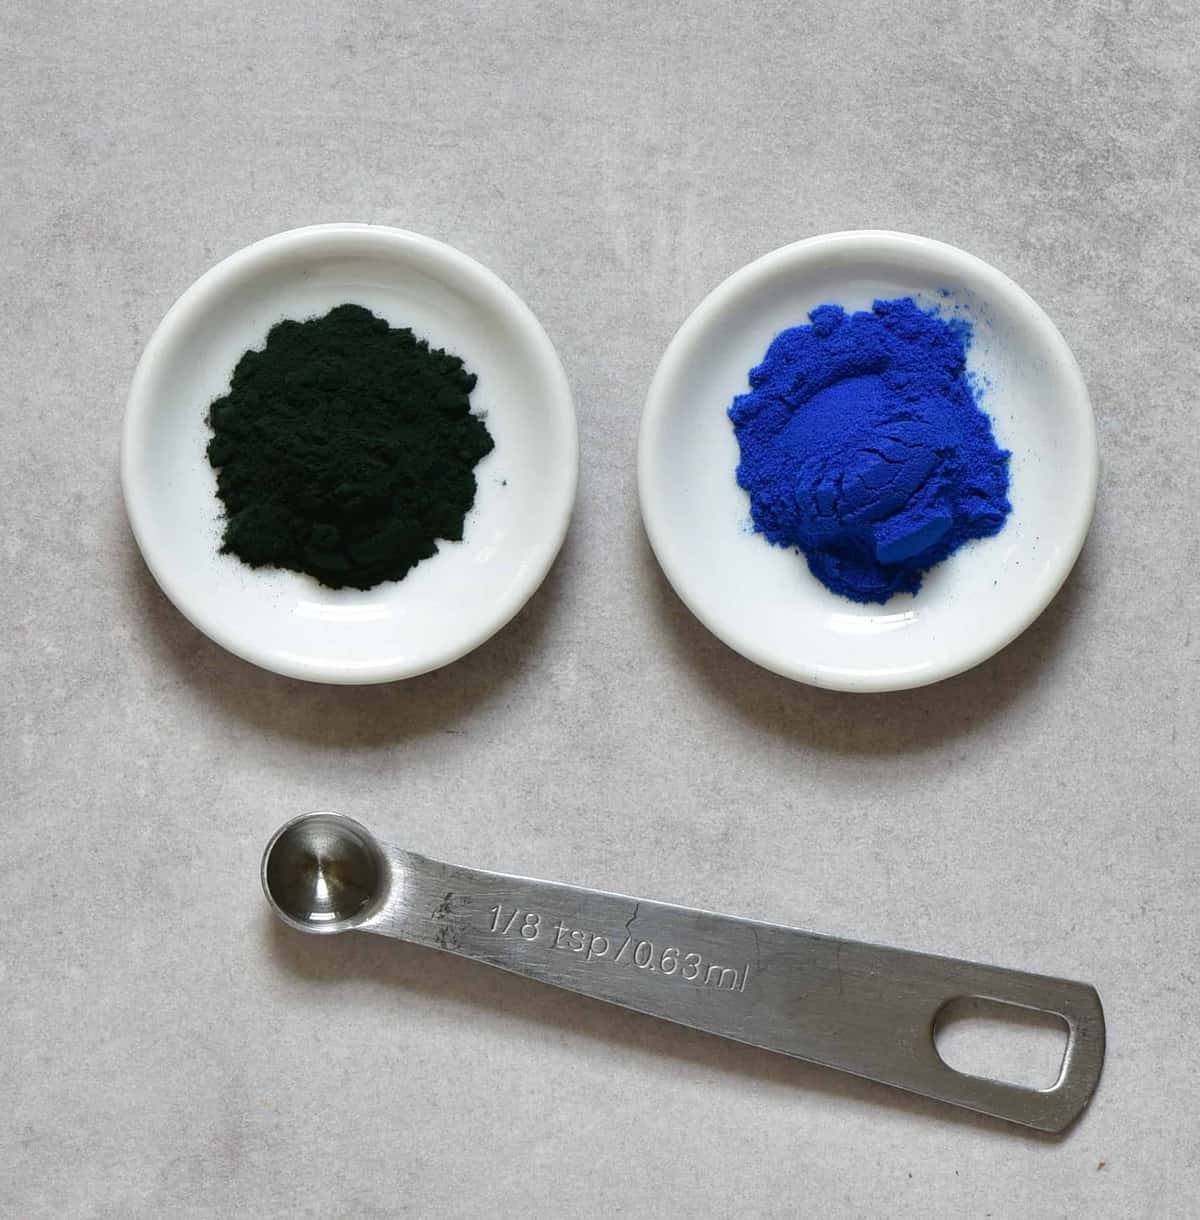 spirulina and mint in small dishes